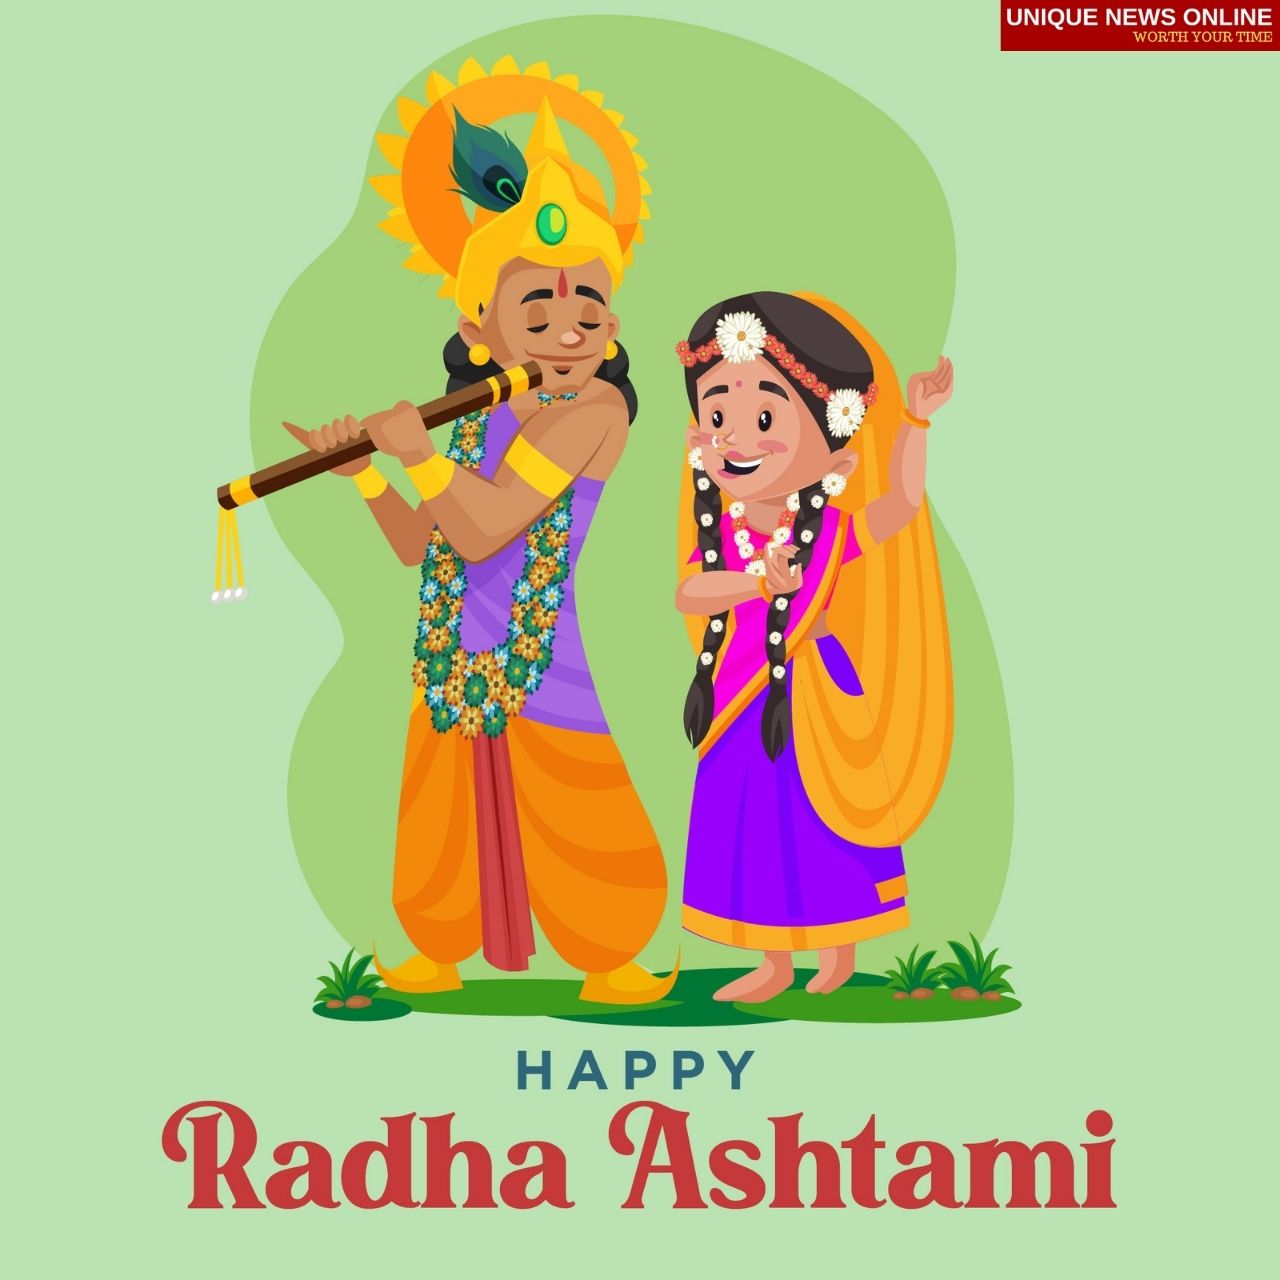 Happy Radha Ashtami 2021 Wishes, Quotes, HD Images, Status, and Greetings to greet anyone